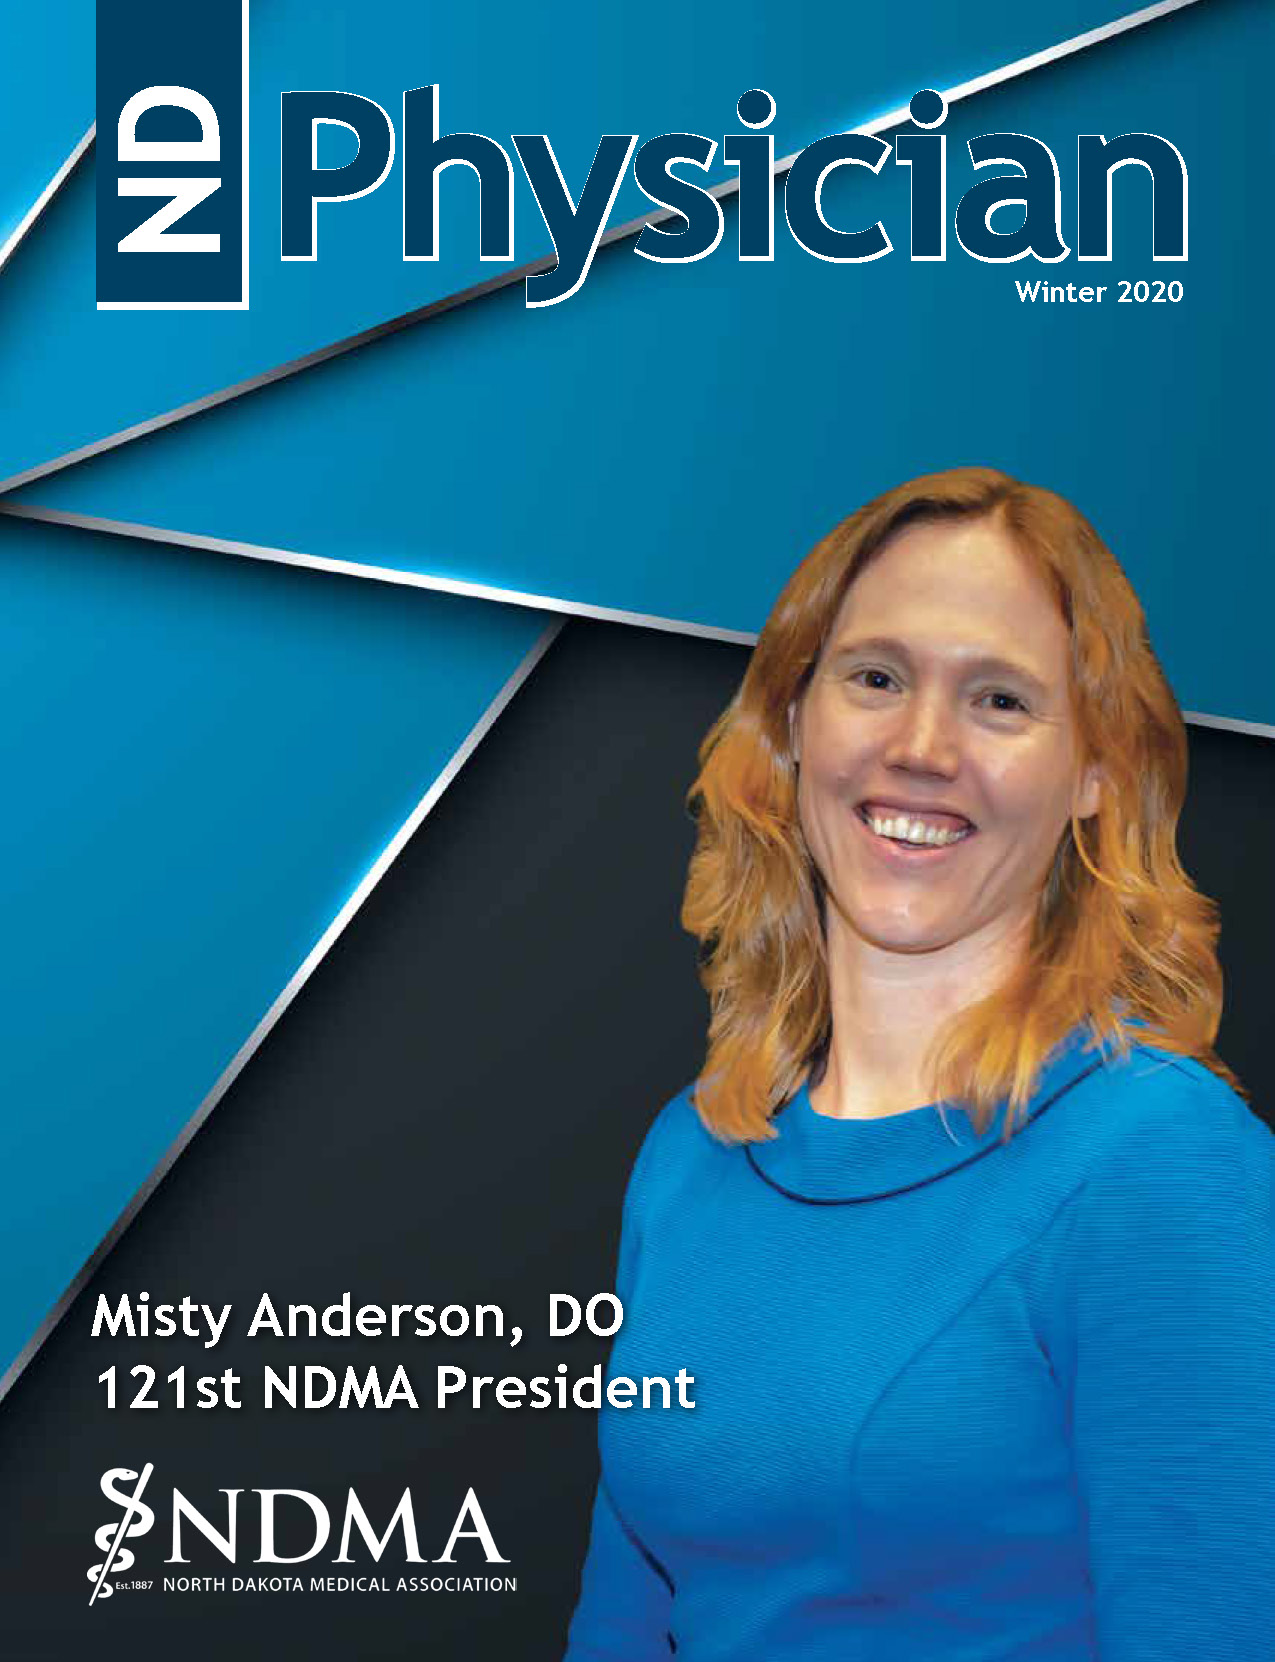 ND Physician Winter 2020 magazine cover